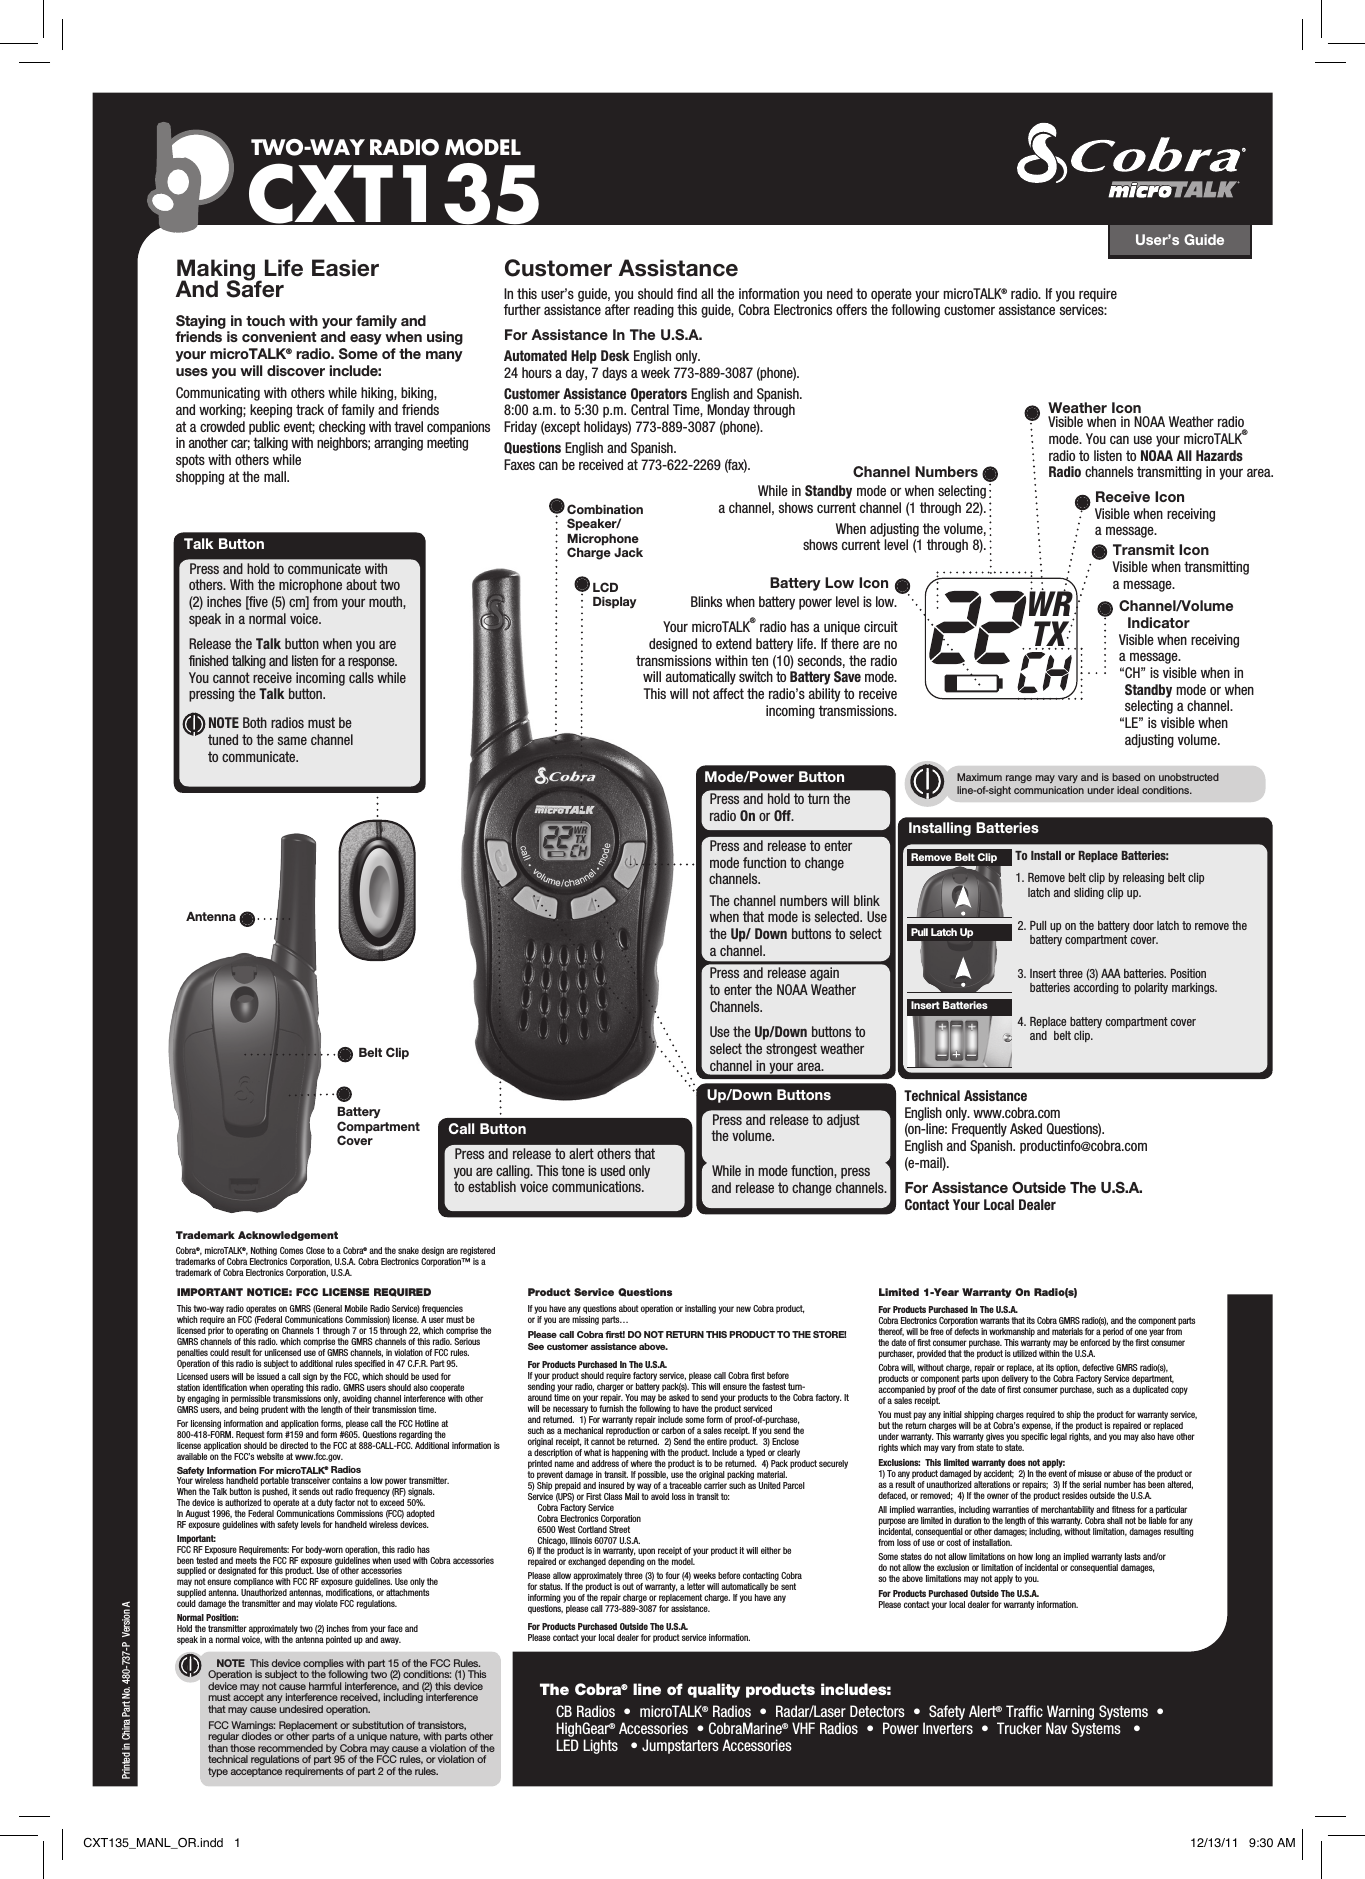 User’s GuideTWO-WAY RADIO  MODEL CXT135NOTE  This device complies with part 15 of the FCC Rules. Operation is subject to the following two (2) conditions: (1) This device may not cause harmful interference, and (2) this device must accept any interference received, including interference that may cause undesired operation.FCC Warnings: Replacement or substitution of transistors, regular diodes or other parts of a unique nature, with parts other than those recommended by Cobra may cause a violation of the technical regulations of part 95 of the FCC rules, or violation of type acceptance requirements of part 2 of the rules.Making Life Easier And Safer Staying in touch with your family and friends is convenient and easy when using your microTALK® radio. Some of the many uses you will discover include:Communicating with others while hiking, biking, and working; keeping track of family and friends at a crowded public event; checking with travel companions in another car; talking with neighbors; arranging meeting spots with others while shopping at the mall.Customer AssistanceIn this user’s guide, you should find all the information you need to operate your microTALK® radio. If you require further assistance after reading this guide, Cobra Electronics offers the following customer assistance services:For Assistance In The U.S.A. Automated Help Desk English only. 24 hours a day, 7 days a week 773-889-3087 (phone). Customer Assistance Operators English and Spanish. 8:00 a.m. to 5:30 p.m. Central Time, Monday through Friday (except holidays) 773-889-3087 (phone). Questions English and Spanish. Faxes can be received at 773-622-2269 (fax). Up/Down ButtonsWhile in mode function, press      and release to change channels.Press and release to adjust    the volume.Call ButtonPress and release to alert others that   you are calling. This tone is used only   to establish voice communications.Printed in China Part No. 480-737-P  Version ABattery Compartment CoverBelt ClipAntenna Talk ButtonPress and hold to communicate with      others. With the microphone about two      (2) inches [five (5) cm] from your mouth,      speak in a normal voice.   Release the Talk button when you are      finished talking and listen for a response.    You cannot receive incoming calls while    pressing the Talk button.         NOTE Both radios must be tuned to the same channel to communicate.IMPORTANT NOTICE: FCC LICENSE REQUIREDThis two-way radio operates on GMRS (General Mobile Radio Service) frequencies which require an FCC (Federal Communications Commission) license. A user must be licensed prior to operating on Channels 1 through 7 or 15 through 22, which comprise the GMRS channels of this radio. which comprise the GMRS channels of this radio. Serious penalties could result for unlicensed use of GMRS channels, in violation of FCC rules. Operation of this radio is subject to additional rules specified in 47 C.F.R. Part 95. Licensed users will be issued a call sign by the FCC, which should be used for station identification when operating this radio. GMRS users should also cooperate by engaging in permissible transmissions only, avoiding channel interference with other GMRS users, and being prudent with the length of their transmission time. For licensing information and application forms, please call the FCC Hotline at 800-418-FORM. Request form #159 and form #605. Questions regarding the license application should be directed to the FCC at 888-CALL-FCC. Additional information is available on the FCC’s website at www.fcc.gov.Safety Information For microTALK® RadiosYour wireless handheld portable transceiver contains a low power transmitter. When the Talk button is pushed, it sends out radio frequency (RF) signals. The device is authorized to operate at a duty factor not to exceed 50%. In August 1996, the Federal Communications Commissions (FCC) adopted RF exposure guidelines with safety levels for handheld wireless devices. Important: FCC RF Exposure Requirements: For body-worn operation, this radio has been tested and meets the FCC RF exposure guidelines when used with Cobra accessories supplied or designated for this product. Use of other accessories may not ensure compliance with FCC RF exposure guidelines. Use only the supplied antenna. Unauthorized antennas, modifications, or attachments could damage the transmitter and may violate FCC regulations. Normal Position: Hold the transmitter approximately two (2) inches from your face and speak in a normal voice, with the antenna pointed up and away.Product Service QuestionsIf you have any questions about operation or installing your new Cobra product, or if you are missing parts… Please call Cobra first! DO NOT RETURN THIS PRODUCT TO THE STORE! See customer assistance above.For Products Purchased In The U.S.A.If your product should require factory service, please call Cobra first before sending your radio, charger or battery pack(s). This will ensure the fastest turn-around time on your repair. You may be asked to send your products to the Cobra factory. It will be necessary to furnish the following to have the product serviced and returned.  1) For warranty repair include some form of proof-of-purchase, such as a mechanical reproduction or carbon of a sales receipt. If you send the original receipt, it cannot be returned.  2) Send the entire product.  3) Enclose a description of what is happening with the product. Include a typed or clearly printed name and address of where the product is to be returned.  4) Pack product securely to prevent damage in transit. If possible, use the original packing material.  5) Ship prepaid and insured by way of a traceable carrier such as United Parcel Service (UPS) or First Class Mail to avoid loss in transit to:    Cobra Factory Service    Cobra Electronics Corporation    6500 West Cortland Street    Chicago, Illinois 60707 U.S.A.  6) If the product is in warranty, upon receipt of your product it will either be repaired or exchanged depending on the model. Please allow approximately three (3) to four (4) weeks before contacting Cobra for status. If the product is out of warranty, a letter will automatically be sent informing you of the repair charge or replacement charge. If you have any questions, please call 773-889-3087 for assistance.For Products Purchased Outside The U.S.A.Please contact your local dealer for product service information.Limited 1-Year Warranty On Radio(s)For Products Purchased In The U.S.A.Cobra Electronics Corporation warrants that its Cobra GMRS radio(s), and the component parts thereof, will be free of defects in workmanship and materials for a period of one year from the date of first consumer purchase. This warranty may be enforced by the first consumer purchaser, provided that the product is utilized within the U.S.A. Cobra will, without charge, repair or replace, at its option, defective GMRS radio(s), products or component parts upon delivery to the Cobra Factory Service department, accompanied by proof of the date of first consumer purchase, such as a duplicated copy of a sales receipt. You must pay any initial shipping charges required to ship the product for warranty service, but the return charges will be at Cobra’s expense, if the product is repaired or replaced under warranty. This warranty gives you specific legal rights, and you may also have other rights which may vary from state to state.Exclusions:  This limited warranty does not apply:  1) To any product damaged by accident;  2) In the event of misuse or abuse of the product or as a result of unauthorized alterations or repairs;  3) If the serial number has been altered, defaced, or removed;  4) If the owner of the product resides outside the U.S.A.All implied warranties, including warranties of merchantability and fitness for a particular purpose are limited in duration to the length of this warranty. Cobra shall not be liable for any incidental, consequential or other damages; including, without limitation, damages resulting from loss of use or cost of installation. Some states do not allow limitations on how long an implied warranty lasts and/or do not allow the exclusion or limitation of incidental or consequential damages, so the above limitations may not apply to you.For Products Purchased Outside The U.S.A.Please contact your local dealer for warranty information.LCD DisplayMaximum range may vary and is based on unobstructed line-of-sight communication under ideal conditions. Installing Batteries To Install or Replace Batteries: 1.  Remove belt clip by releasing belt clip latch and sliding clip up.2.  Pull up on the battery door latch to remove the battery compartment cover.3.  Insert three (3) AAA batteries. Position batteries according to polarity markings.4.  Replace battery compartment cover and  belt clip.Insert BatteriesPull Latch UpRemove Belt ClipTrademark AcknowledgementCobra®, microTALK®, Nothing Comes Close to a Cobra® and the snake design are registered trademarks of Cobra Electronics Corporation, U.S.A. Cobra Electronics Corporation™ is a trademark of Cobra Electronics Corporation, U.S.A. The Cobra® line of quality products includes:     CB Radios  •  microTALK® Radios  •  Radar/Laser Detectors  •  Safety Alert® Traffic Warning Systems  •  HighGear® Accessories  • CobraMarine® VHF Radios  •  Power Inverters  •  Trucker Nav Systems   • LED Lights   • Jumpstarters AccessoriesCombination Speaker/Microphone Charge JackWRTXChannel NumbersWhile in Standby mode or when selecting a channel, shows current channel (1 through 22).When adjusting the volume, shows current level (1 through 8).Battery Low IconBlinks when battery power level is low.Your microTALK® radio has a unique circuit designed to extend battery life. If there are no transmissions within ten (10) seconds, the radio will automatically switch to Battery Save mode. This will not affect the radio’s ability to receive incoming transmissions.Receive IconVisible when receiving a message.Transmit IconVisible when transmittinga message.Channel/Volume IndicatorVisible when receiving a message. “ CH” is visible when in Standby mode or when selecting a channel.“ LE” is visible when adjusting volume.Technical Assistance English only. www.cobra.com (on-line: Frequently Asked Questions). English and Spanish. productinfo@cobra.com (e-mail).For Assistance Outside The U.S.A. Contact Your Local DealerWeather IconVisible when in NOAA Weather radio mode. You can use your microTALK® radio to listen to NOAA All Hazards Radio channels transmitting in your area.Mode/Power ButtonPress and release to enter  mode function to change       channels.The channel numbers will blink when that mode is selected. Use the Up/ Down buttons to select a channel.Press and hold to turn the    radio On or Off.Press and release again  to enter the NOAA Weather Channels.Use the Up/Down buttons to select the strongest weather channel in your area.CXT135_MANL_OR.indd   1 12/13/11   9:30 AM